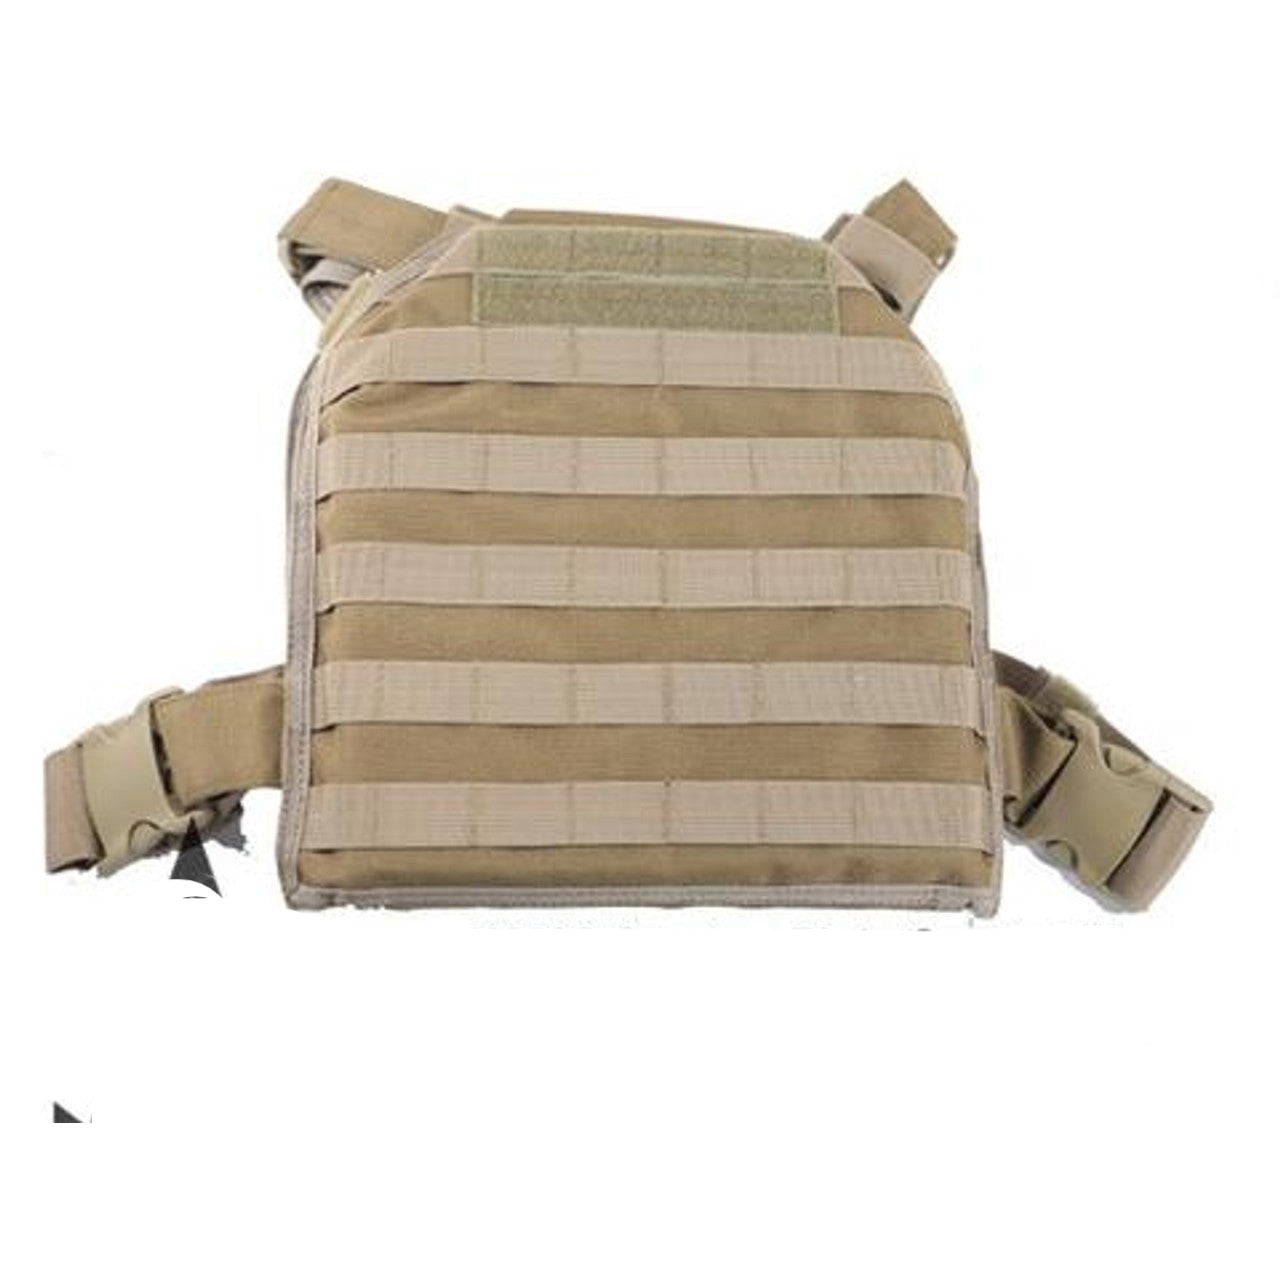 USMG Spartan Plate Carrier VII (SPC7) (Coyote Tan)